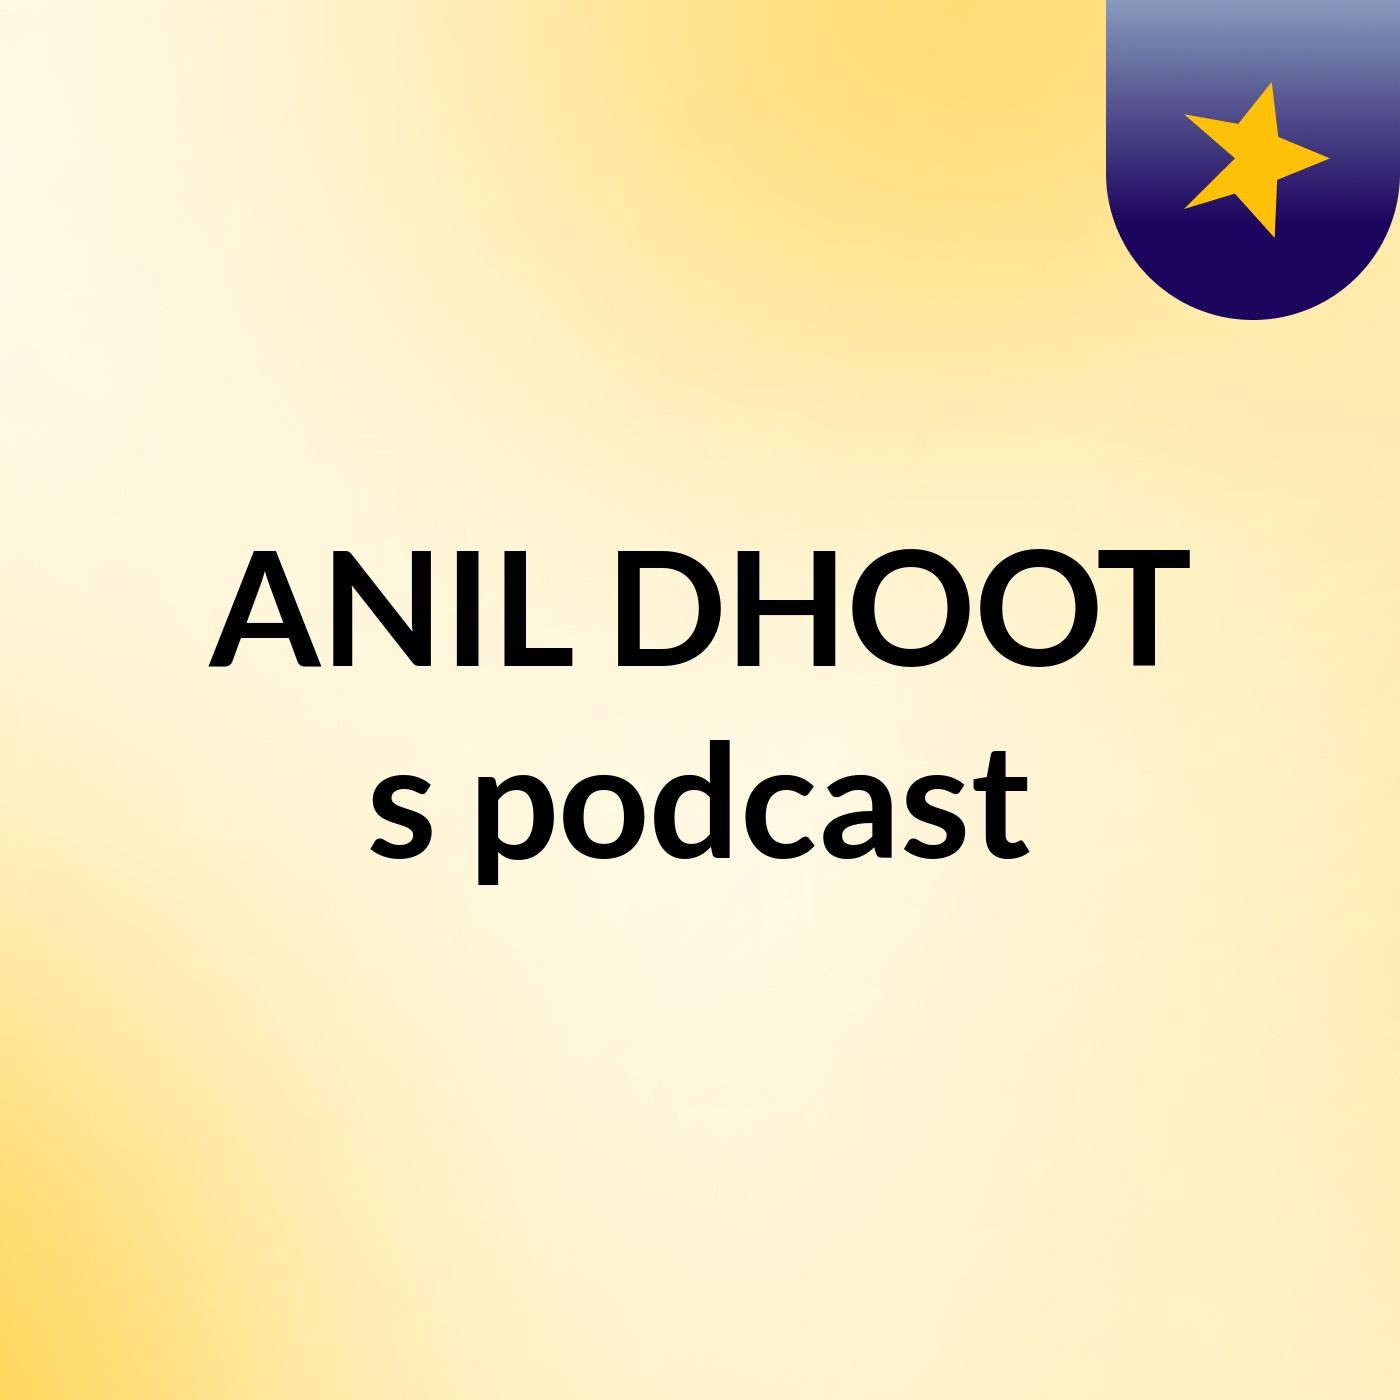 Episode 5 - ANIL DHOOT's podcast